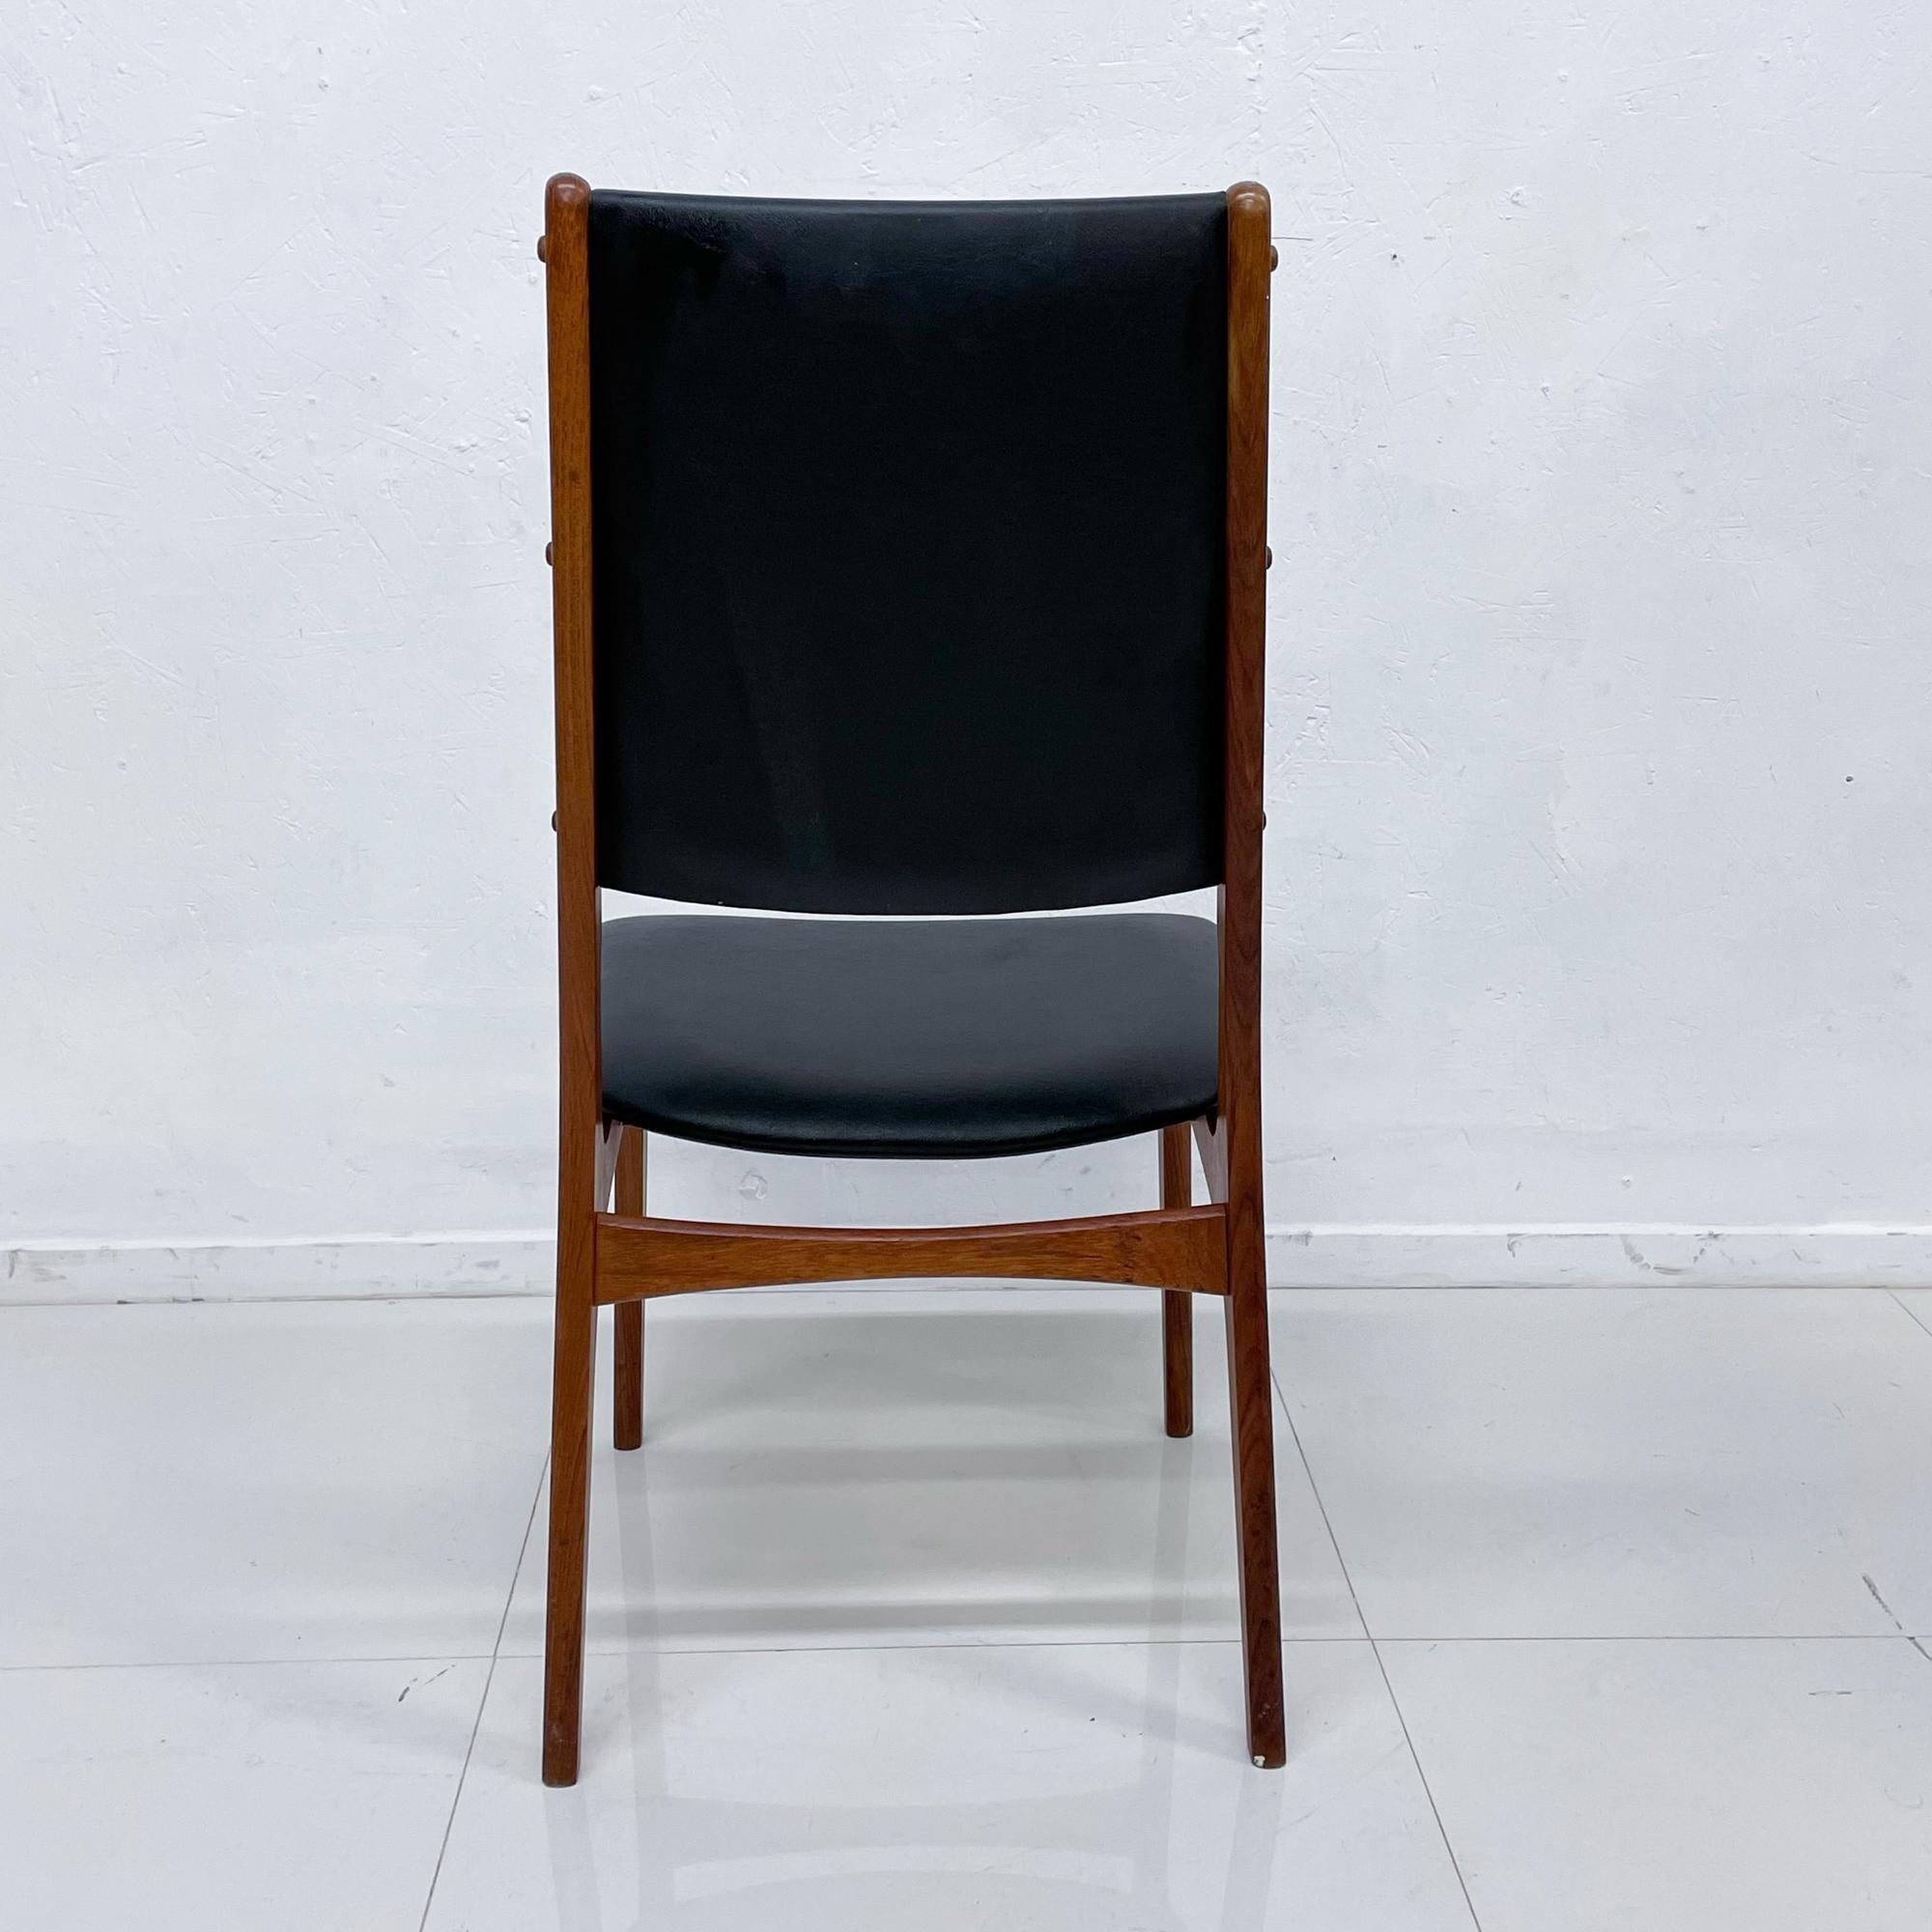 1960s Six Modern Teak Dining Chairs Kofod Larsen Denmark In Good Condition For Sale In Chula Vista, CA